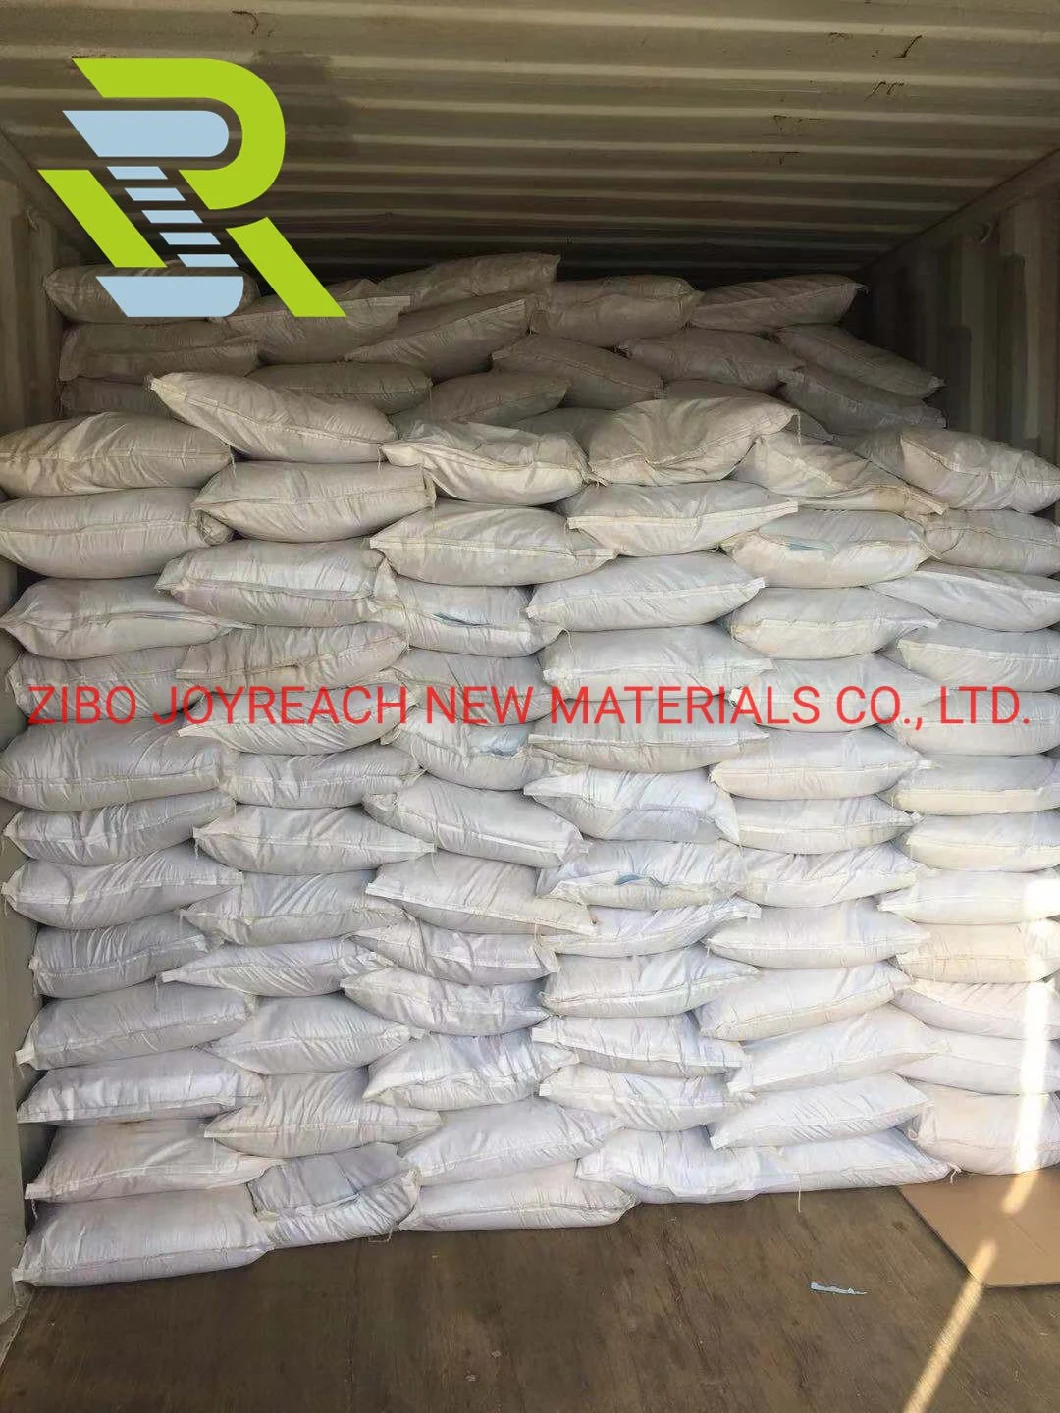 Naphthalene Superplasticizer for Concrete Project with High Strenth, Naphthalene Water Reducing Admixture, Concrete Admixture China Supplier 5% 10% 18% Na2so4